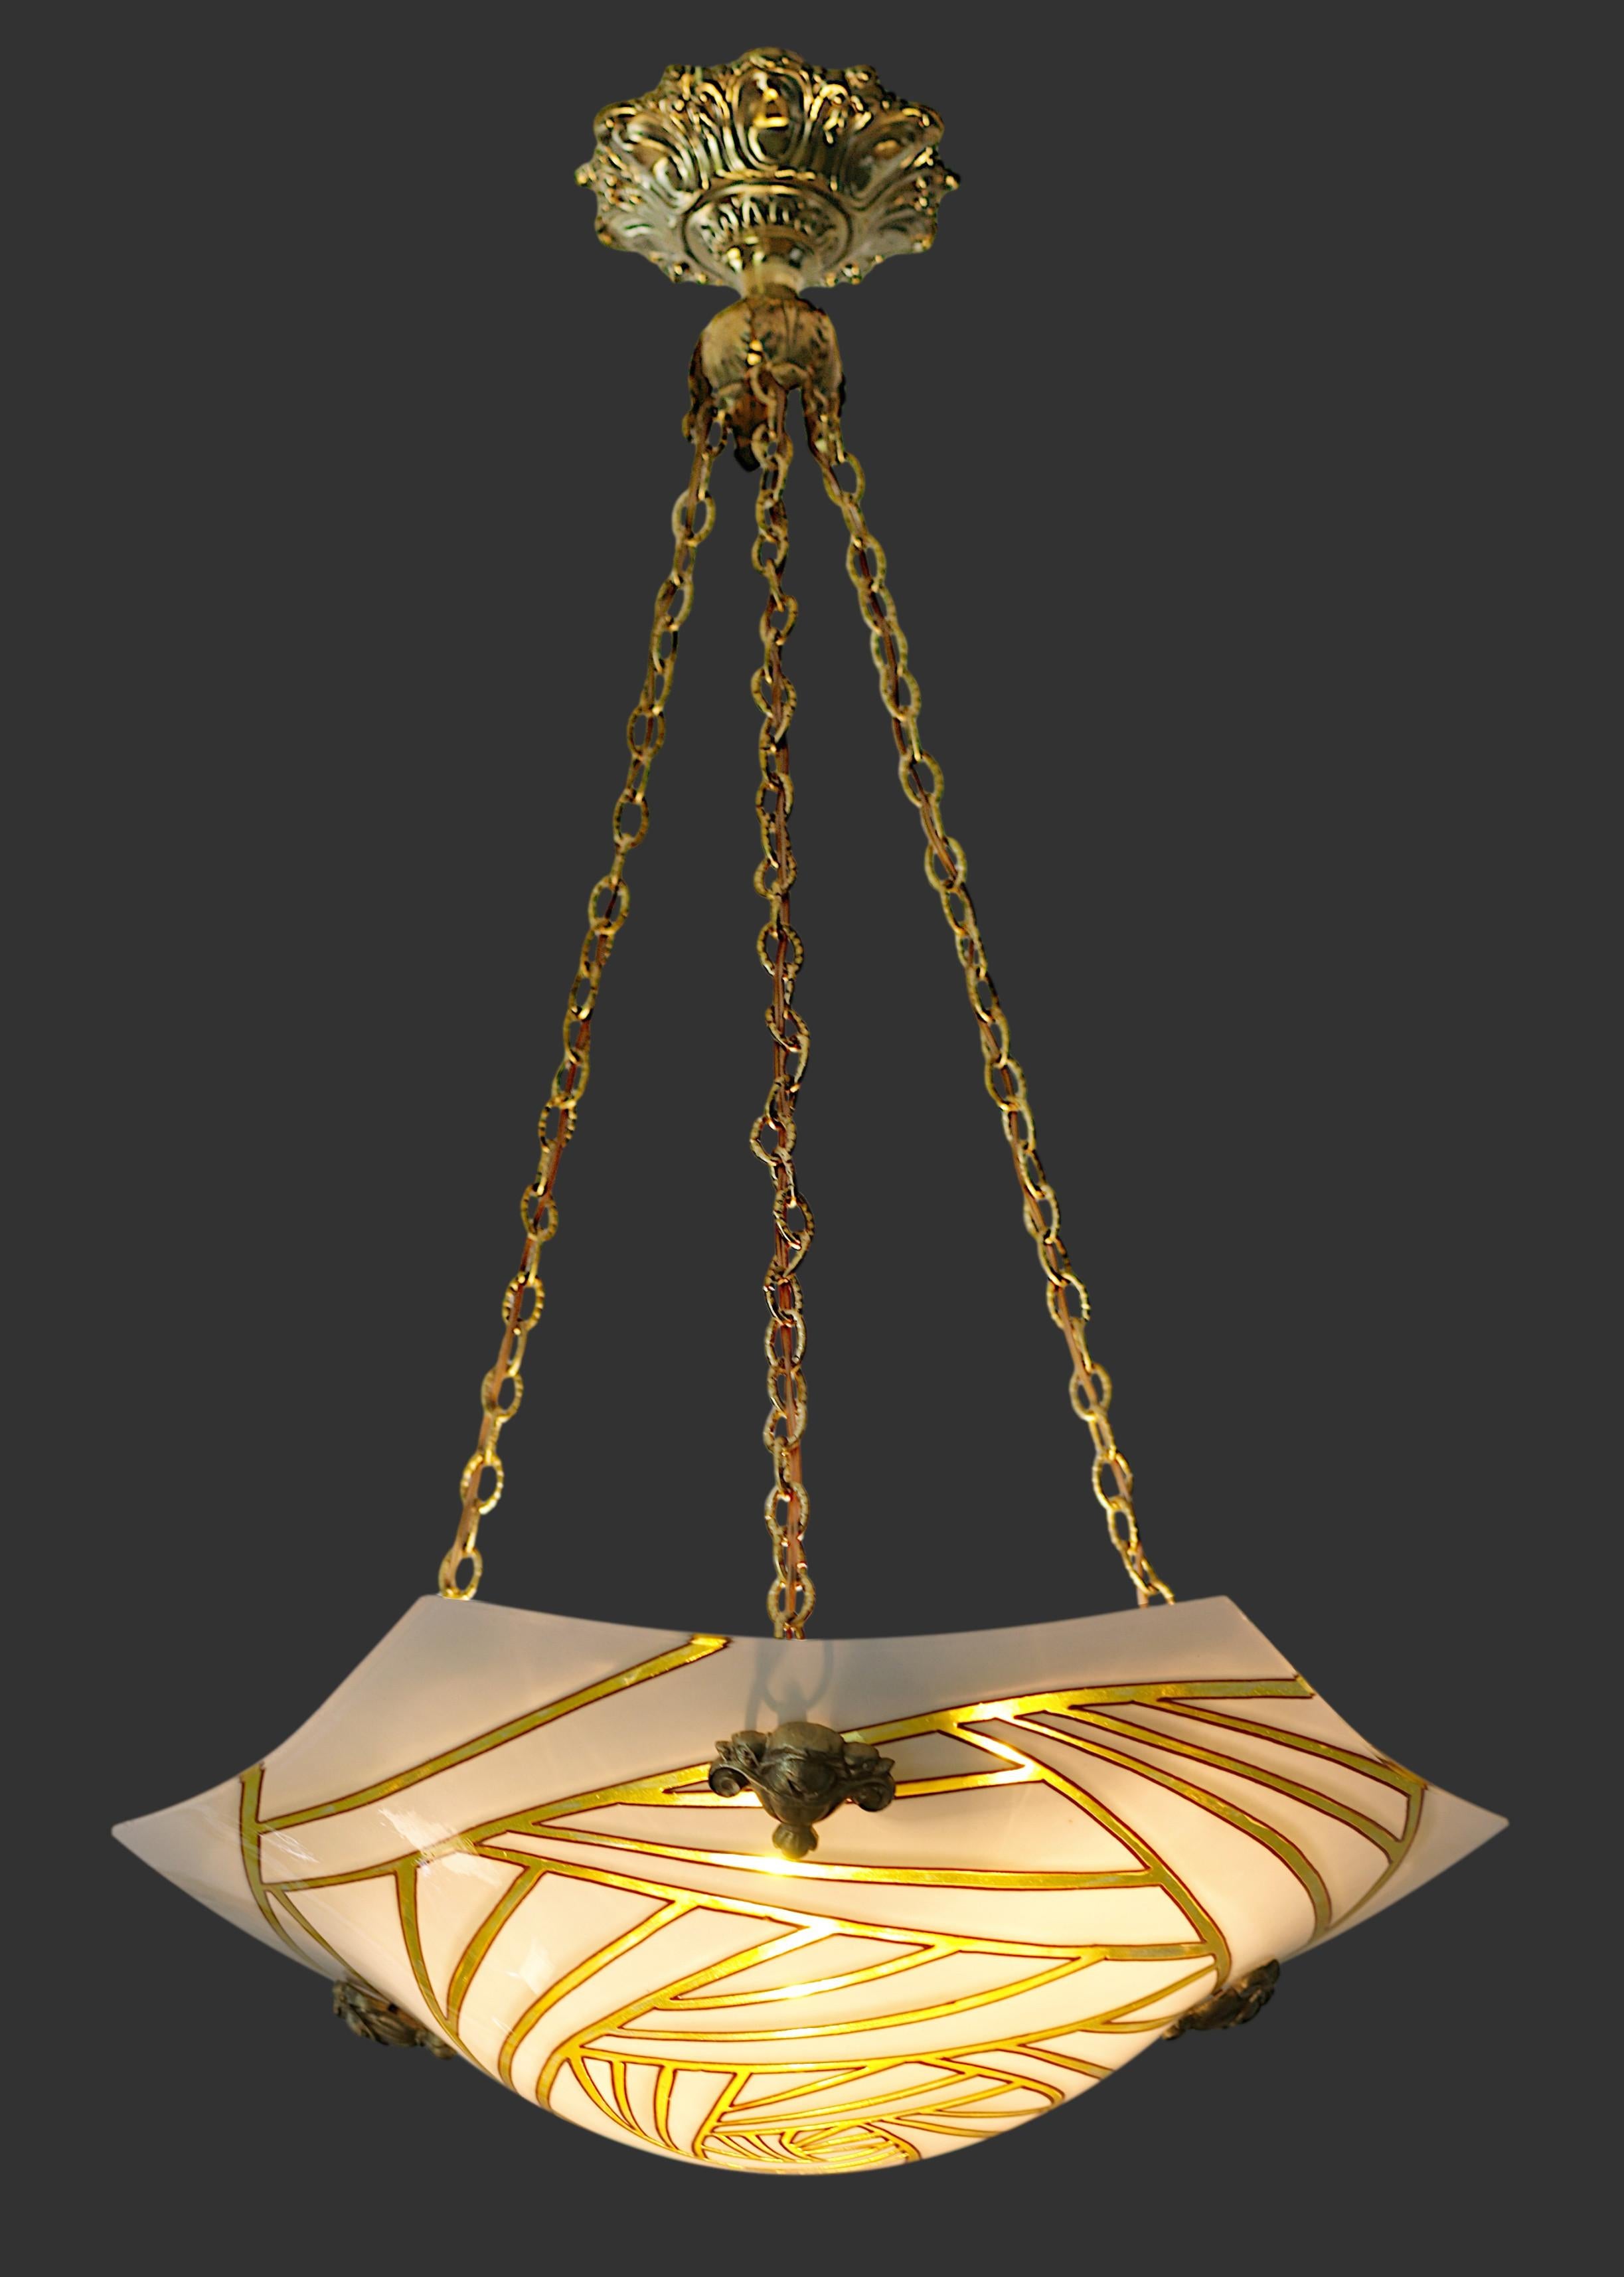 French Art Deco pendant chandelier by MAXONADE, 54bis, rue Labrouste, Paris (15e), France, ca.1930. Enameled glass shade hung at its bronze and br fixture by Charles RANC (Paris). Height : 24.8